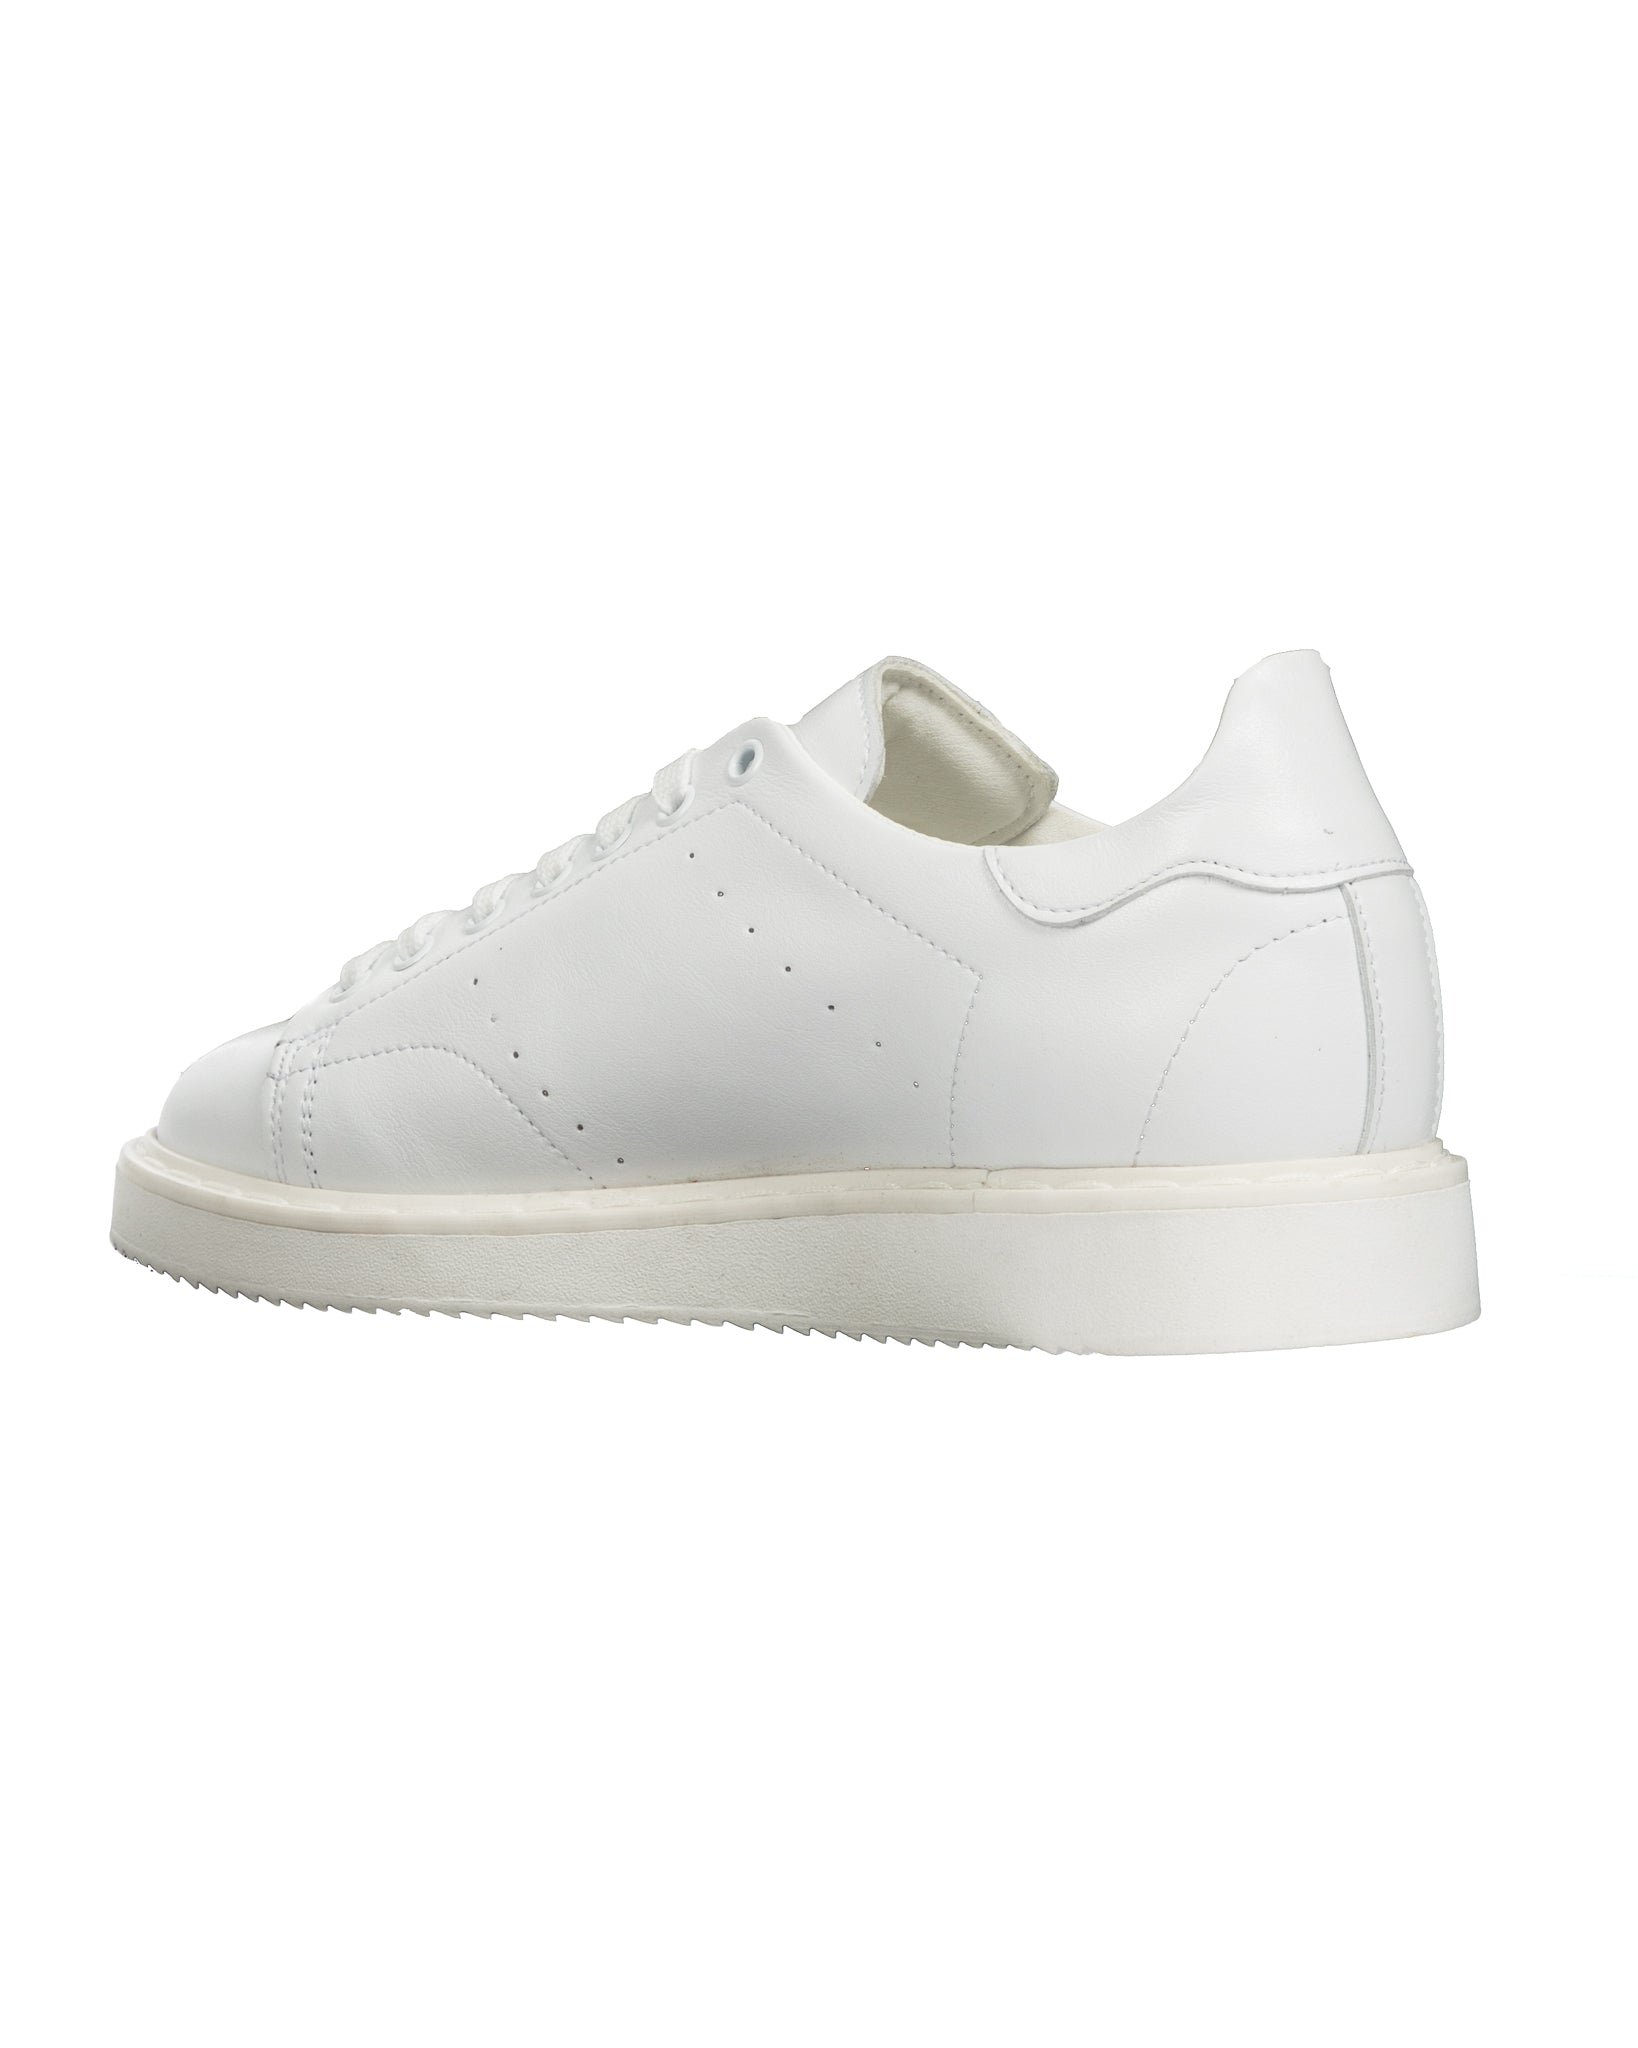 S01 - white leather sneakers